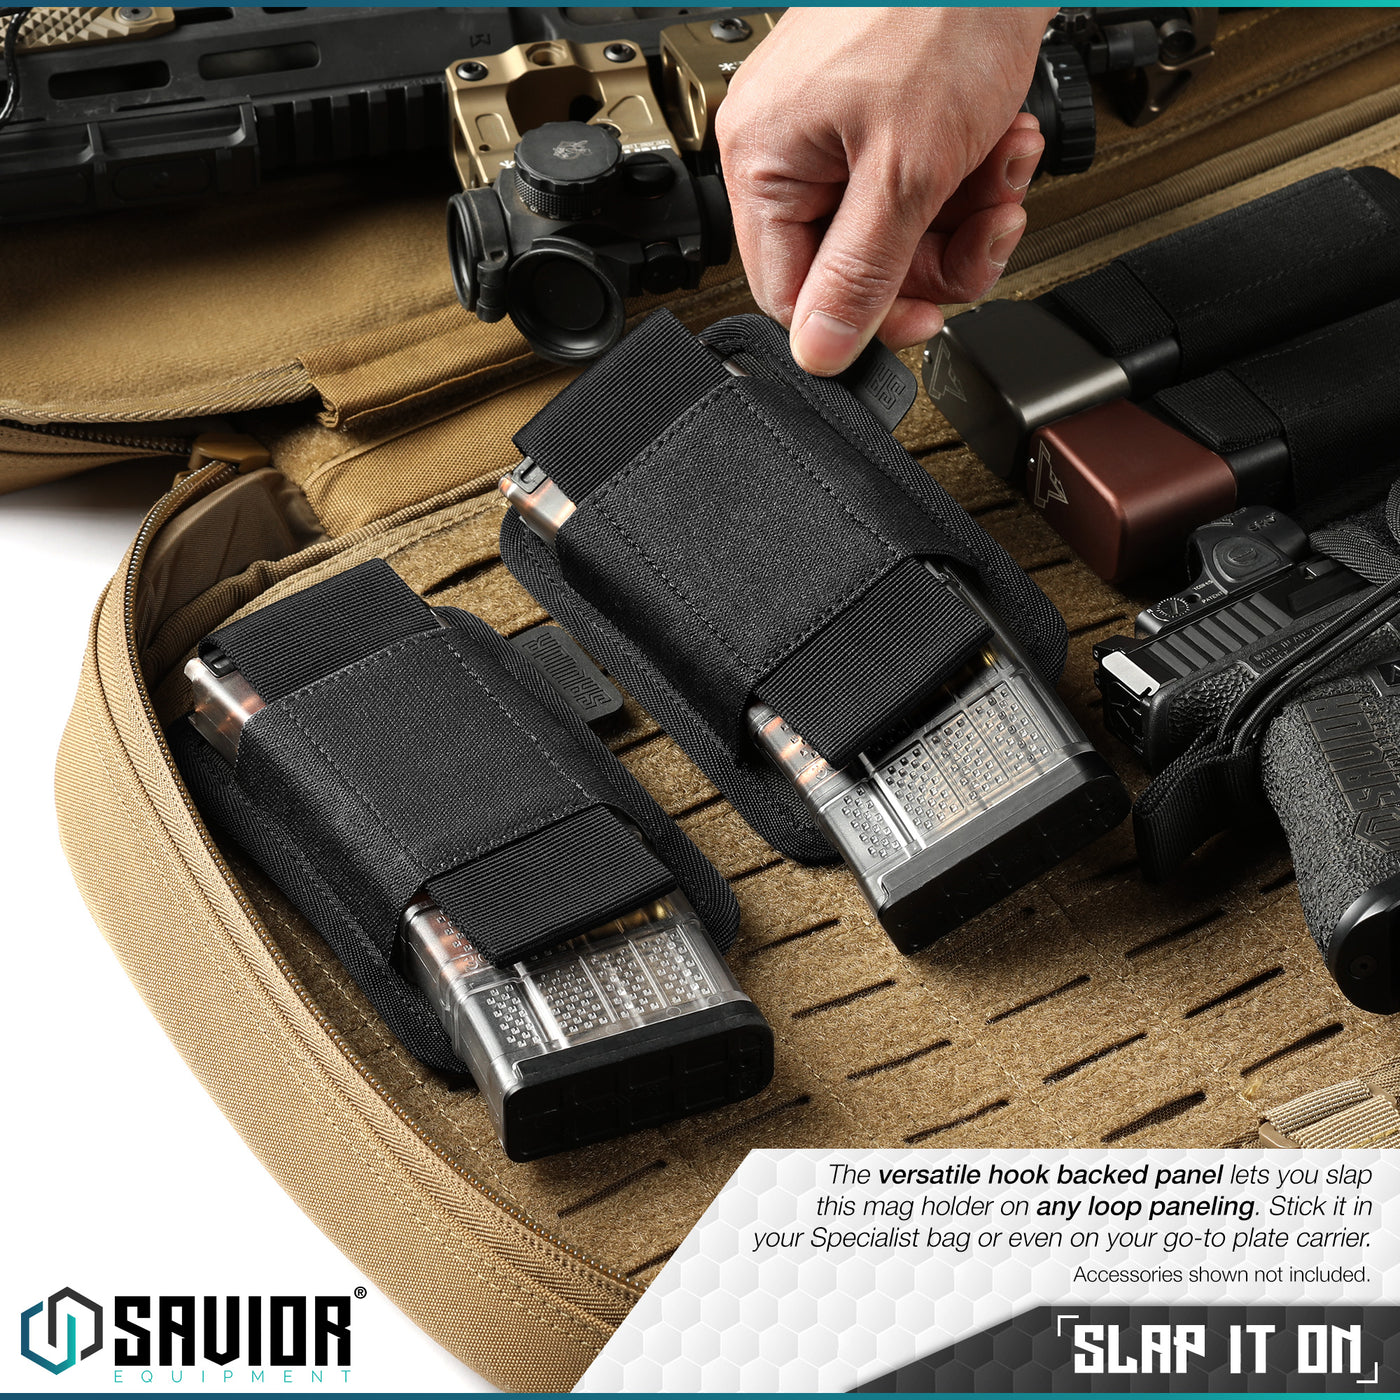 Slap it on - The versatile hook backed panel lets you slap this battery holder on any loop paneling. Stick it in your Specialist bag or even on your go-to plate carrier. Accessories shown not included.